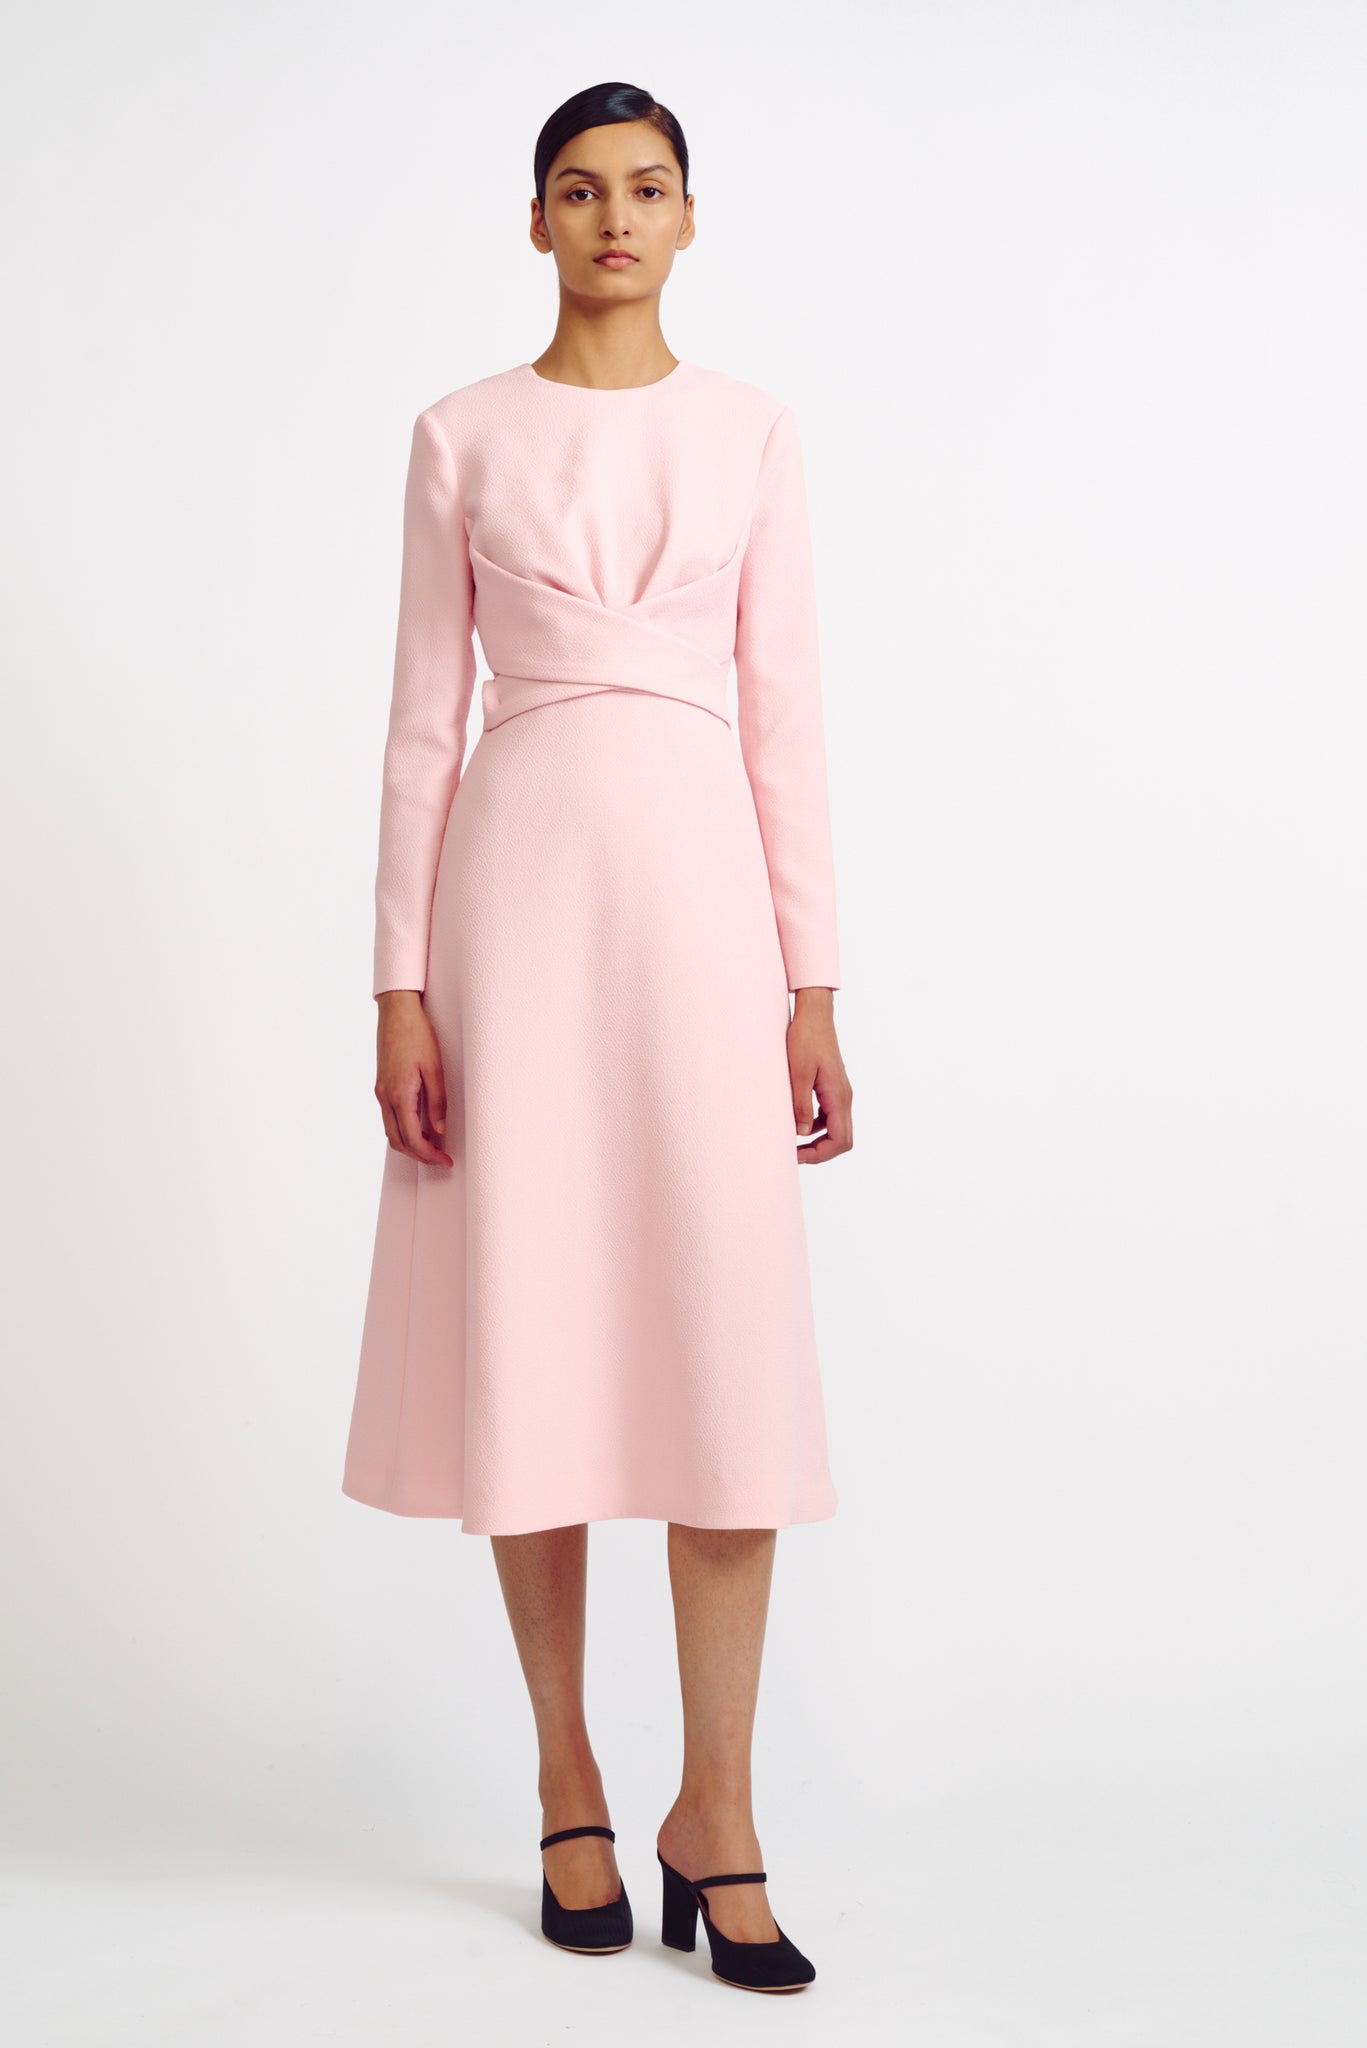 Elta Dress | Peony Wrap Front Long Sleeve Fit-and-Flare Dress | Emilia Wickstead